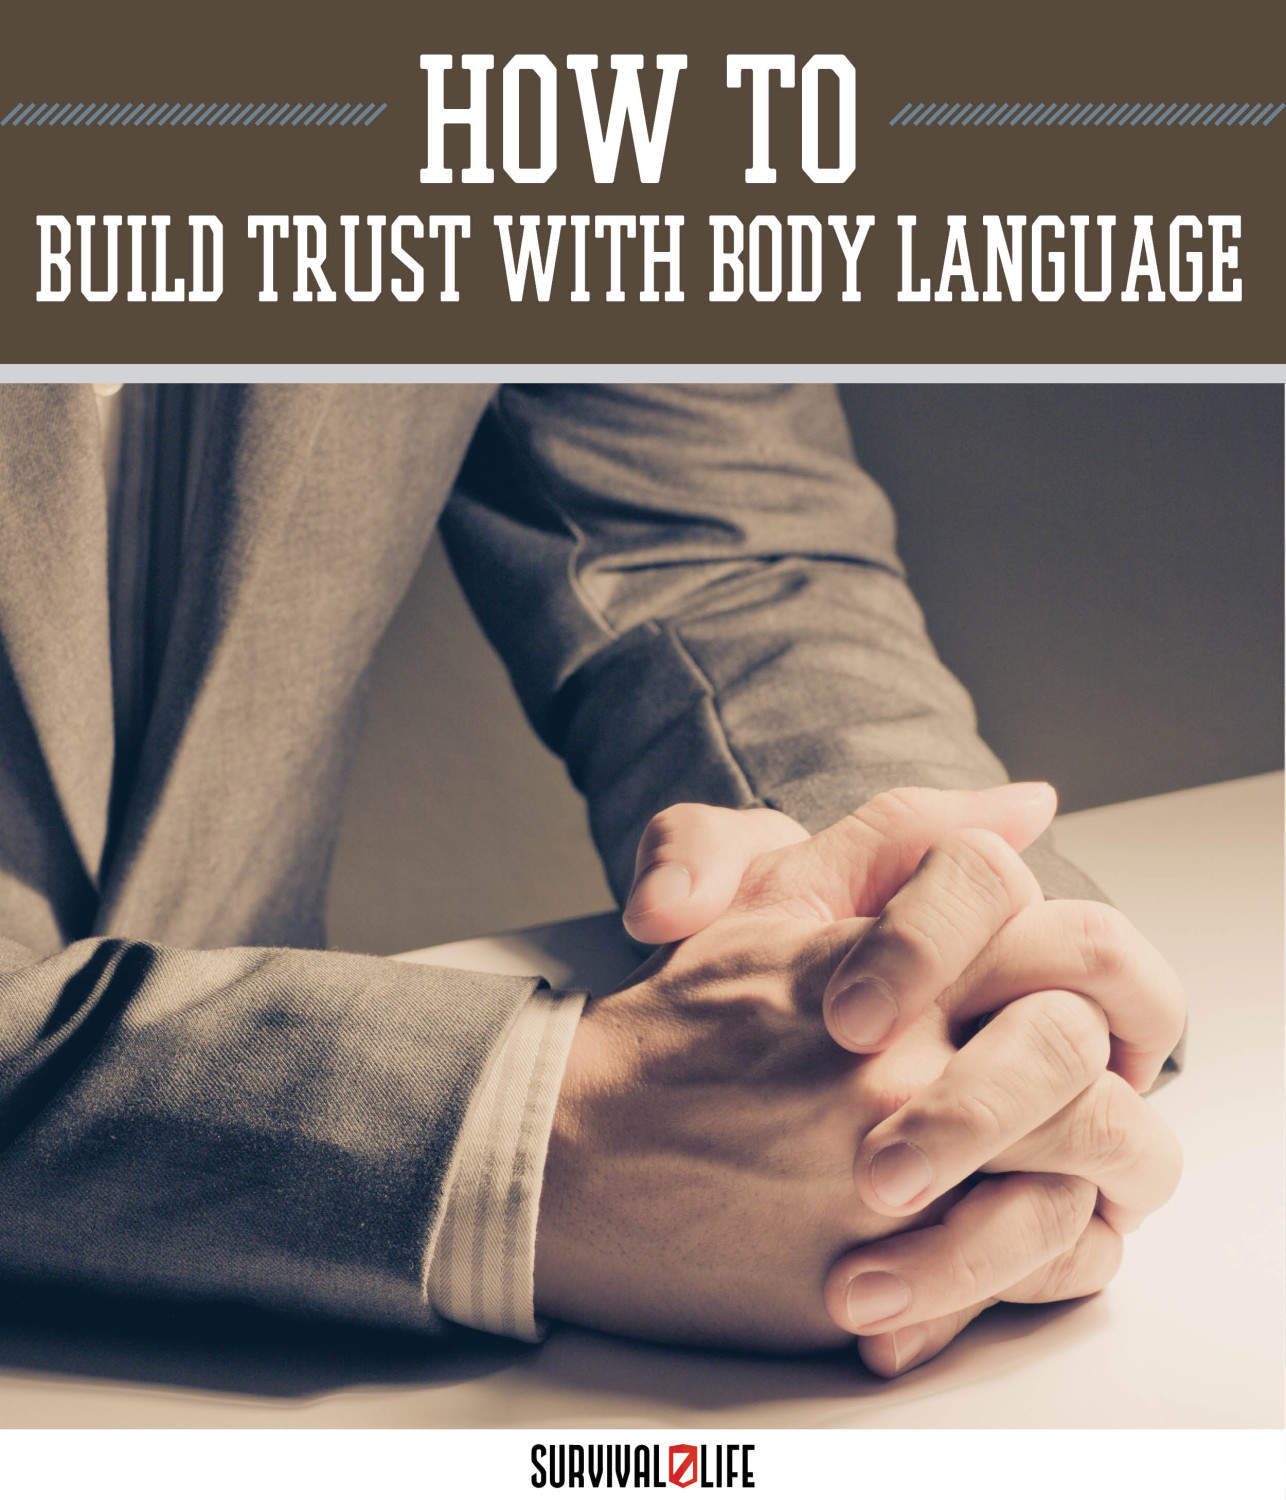 Building Trust with Body Language by Survival Life at http://survivallife.staging.wpengine.com/2015/04/28/building-trust-with-body-language